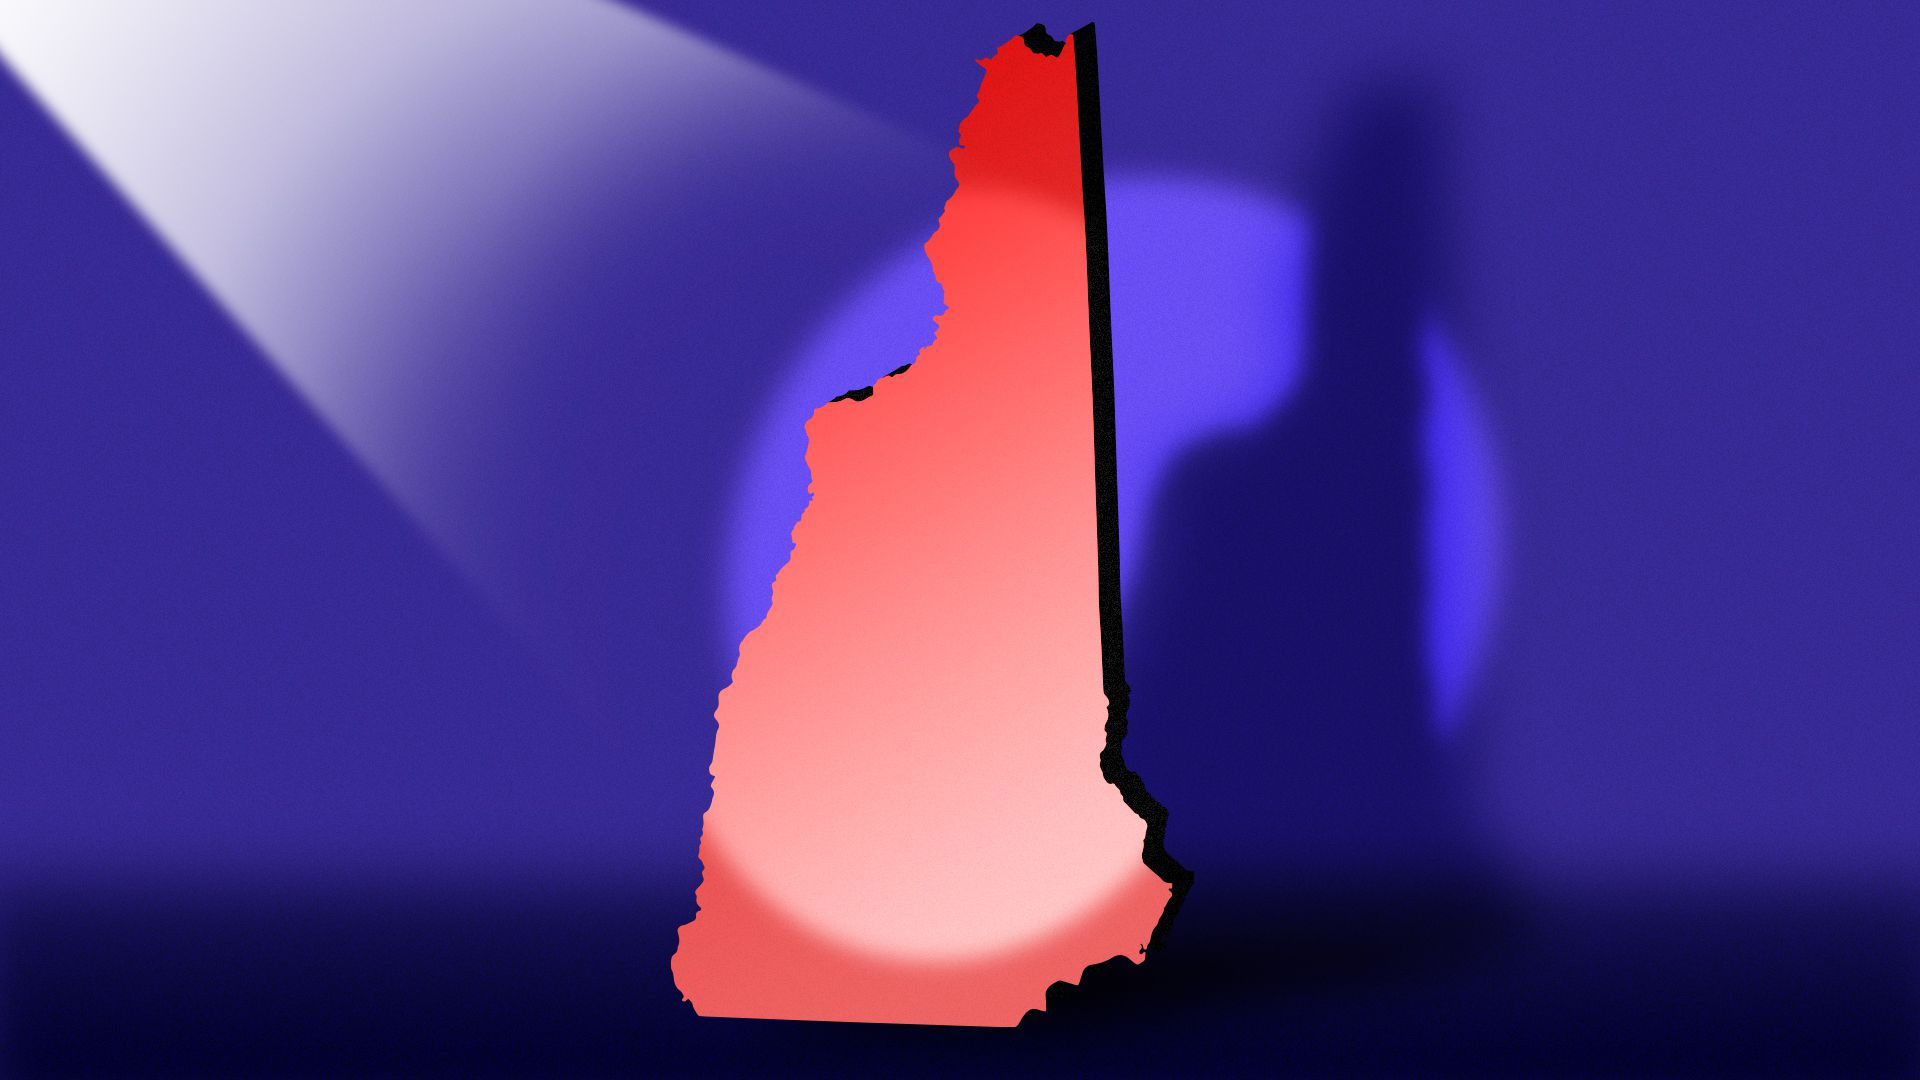 Illustration of the New Hampshire state shape lit by a spotlight